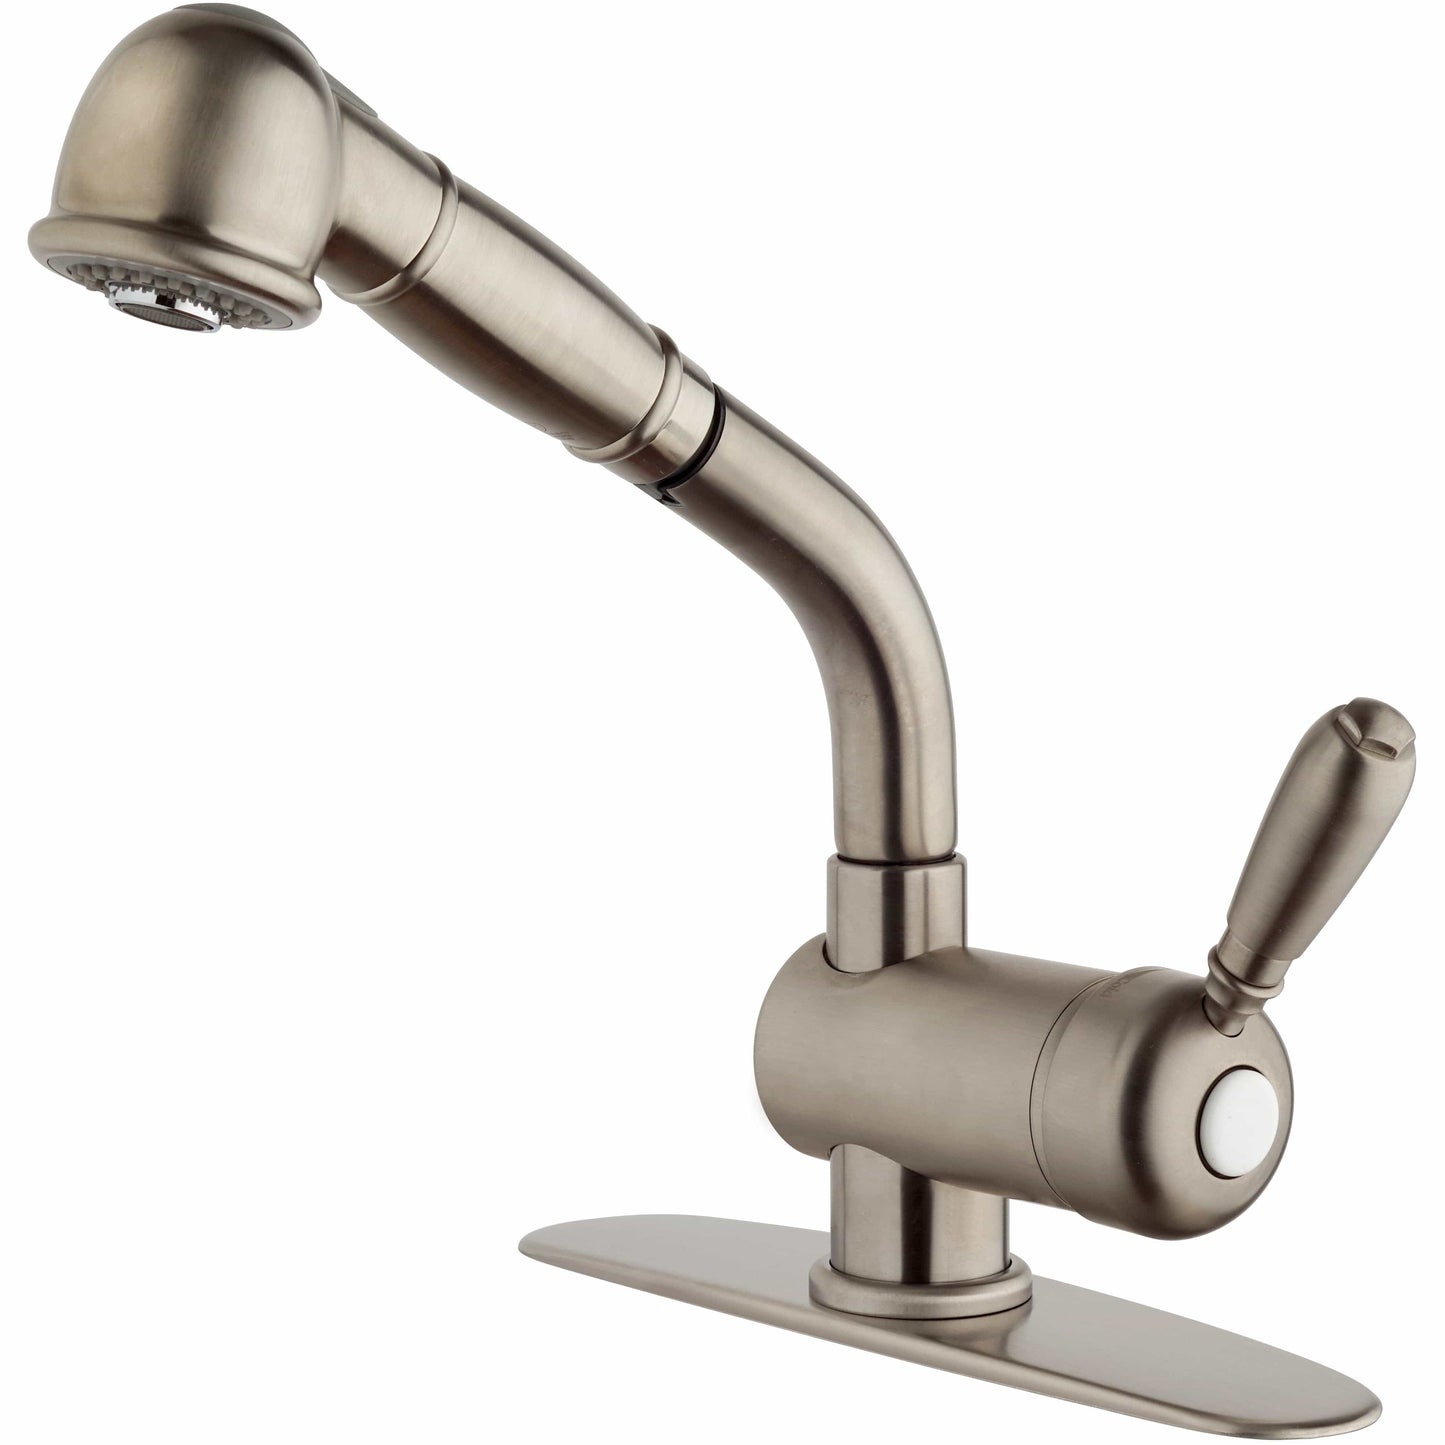 LATOSCANA Antique Single Handle Pull-Out Spray Kitchen Faucet